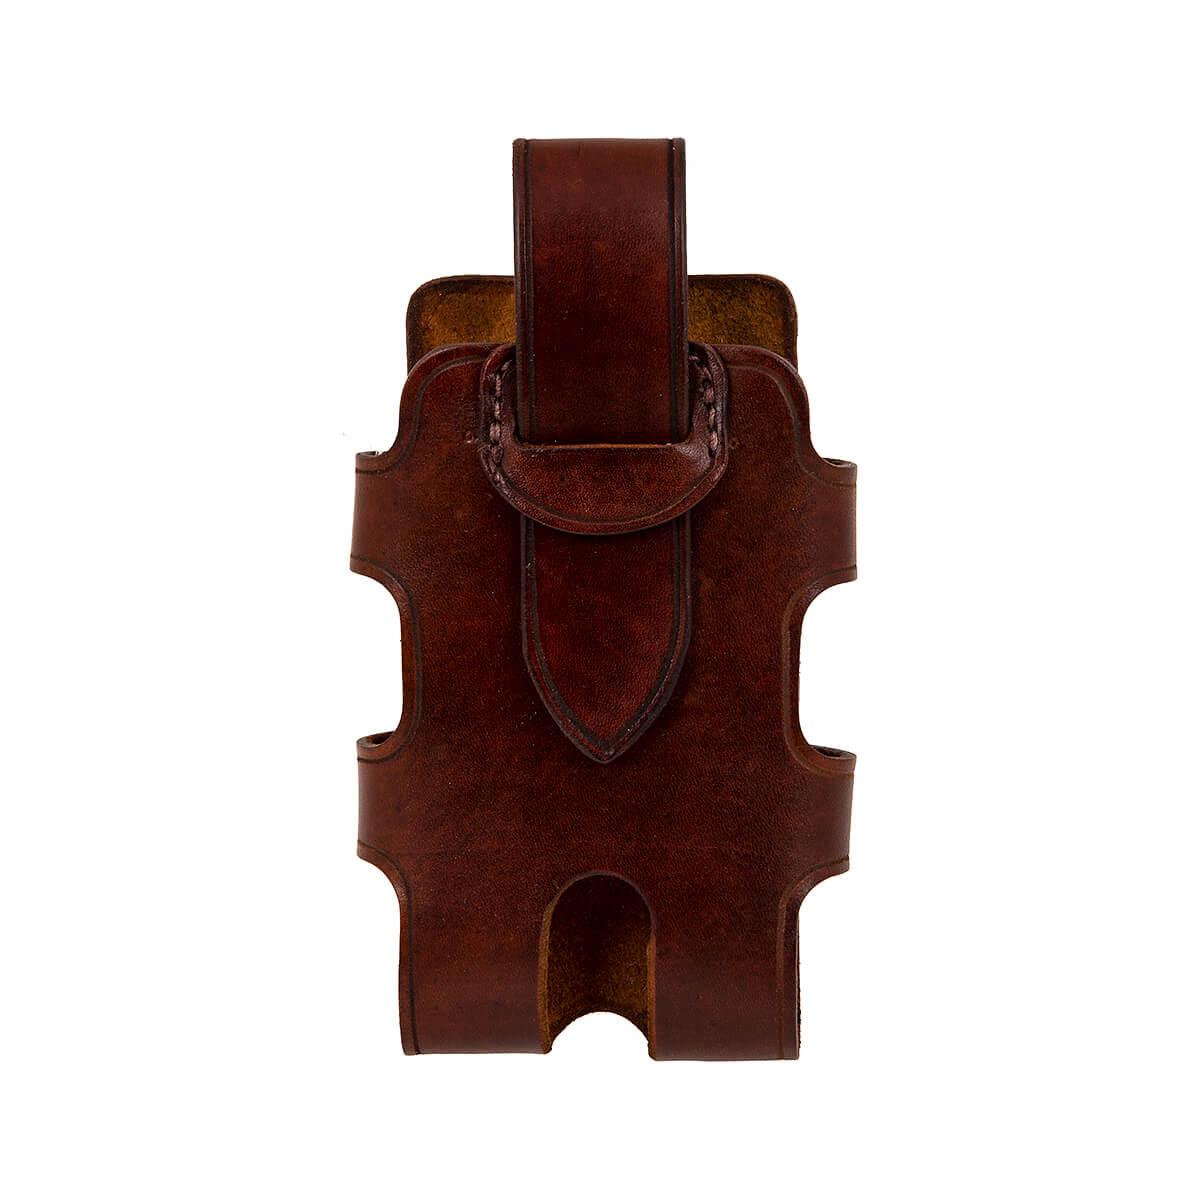  Large Leather Cell Phone Holster